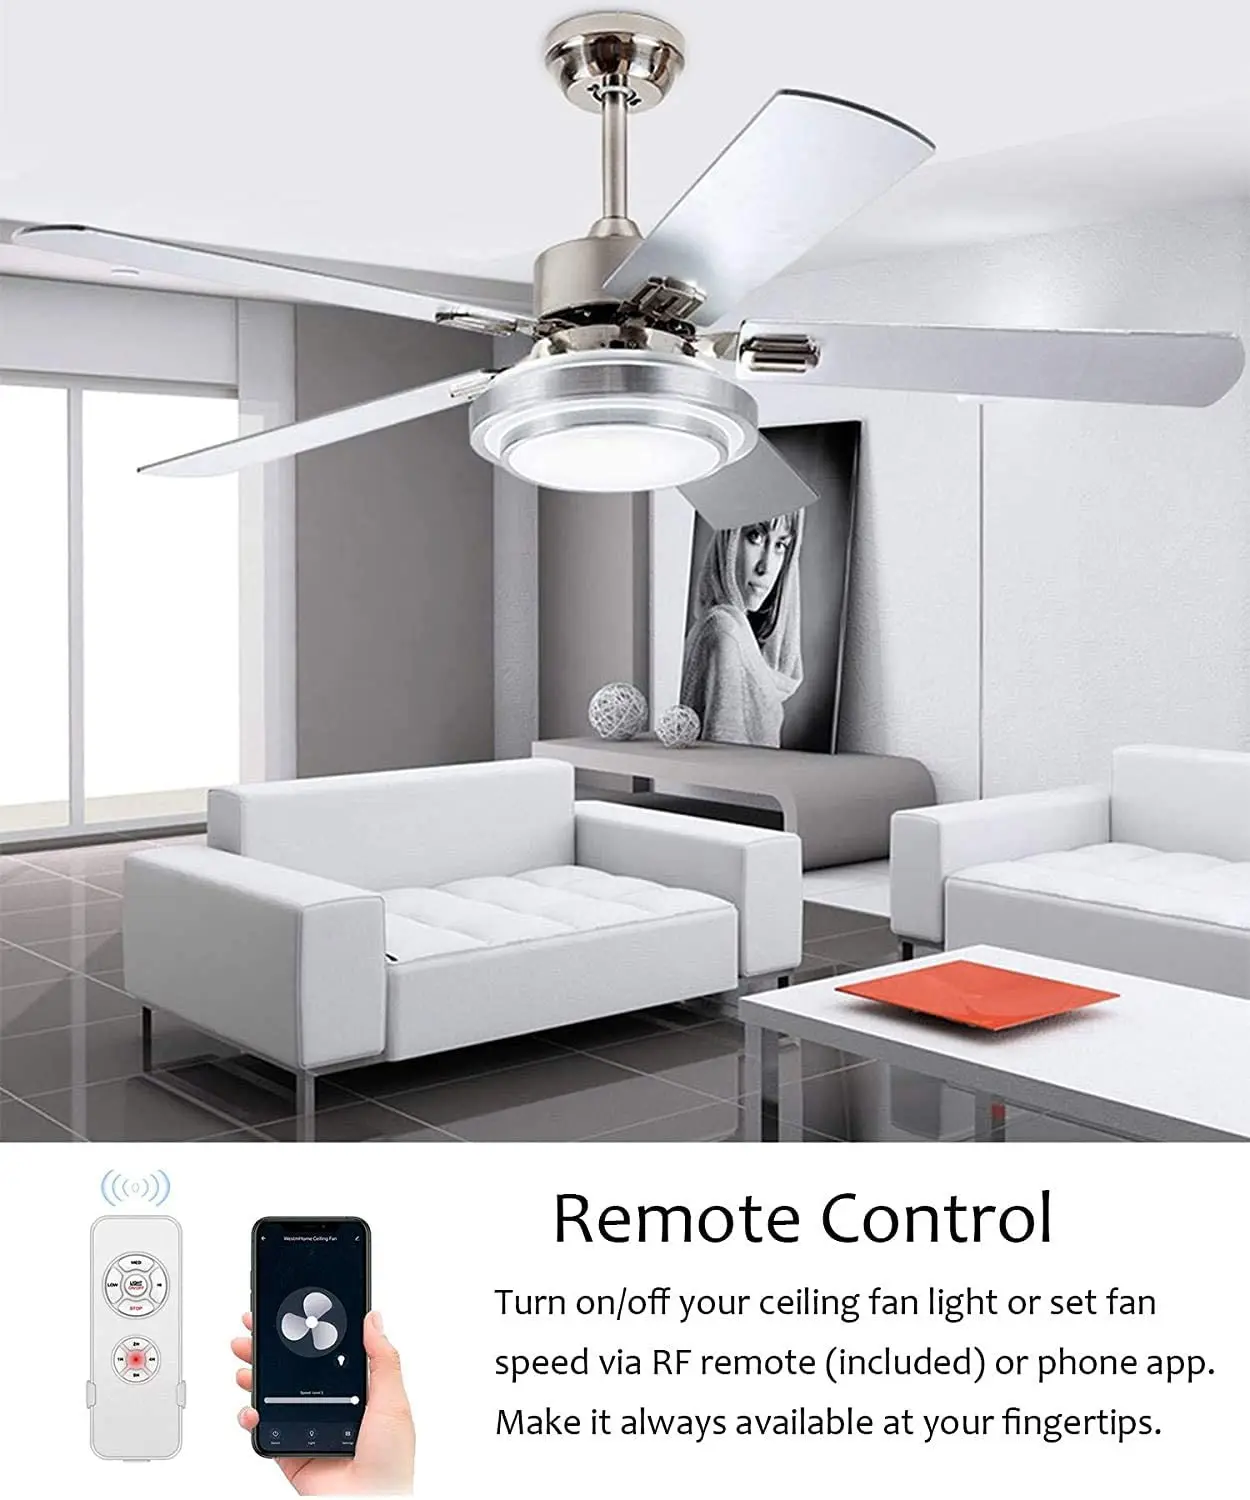 
WiFi Smart Ceiling Fan Light Controller Kit RF/APP Remote Control for Ceiling Fan Compatible with Alexa and Google Home Assist 